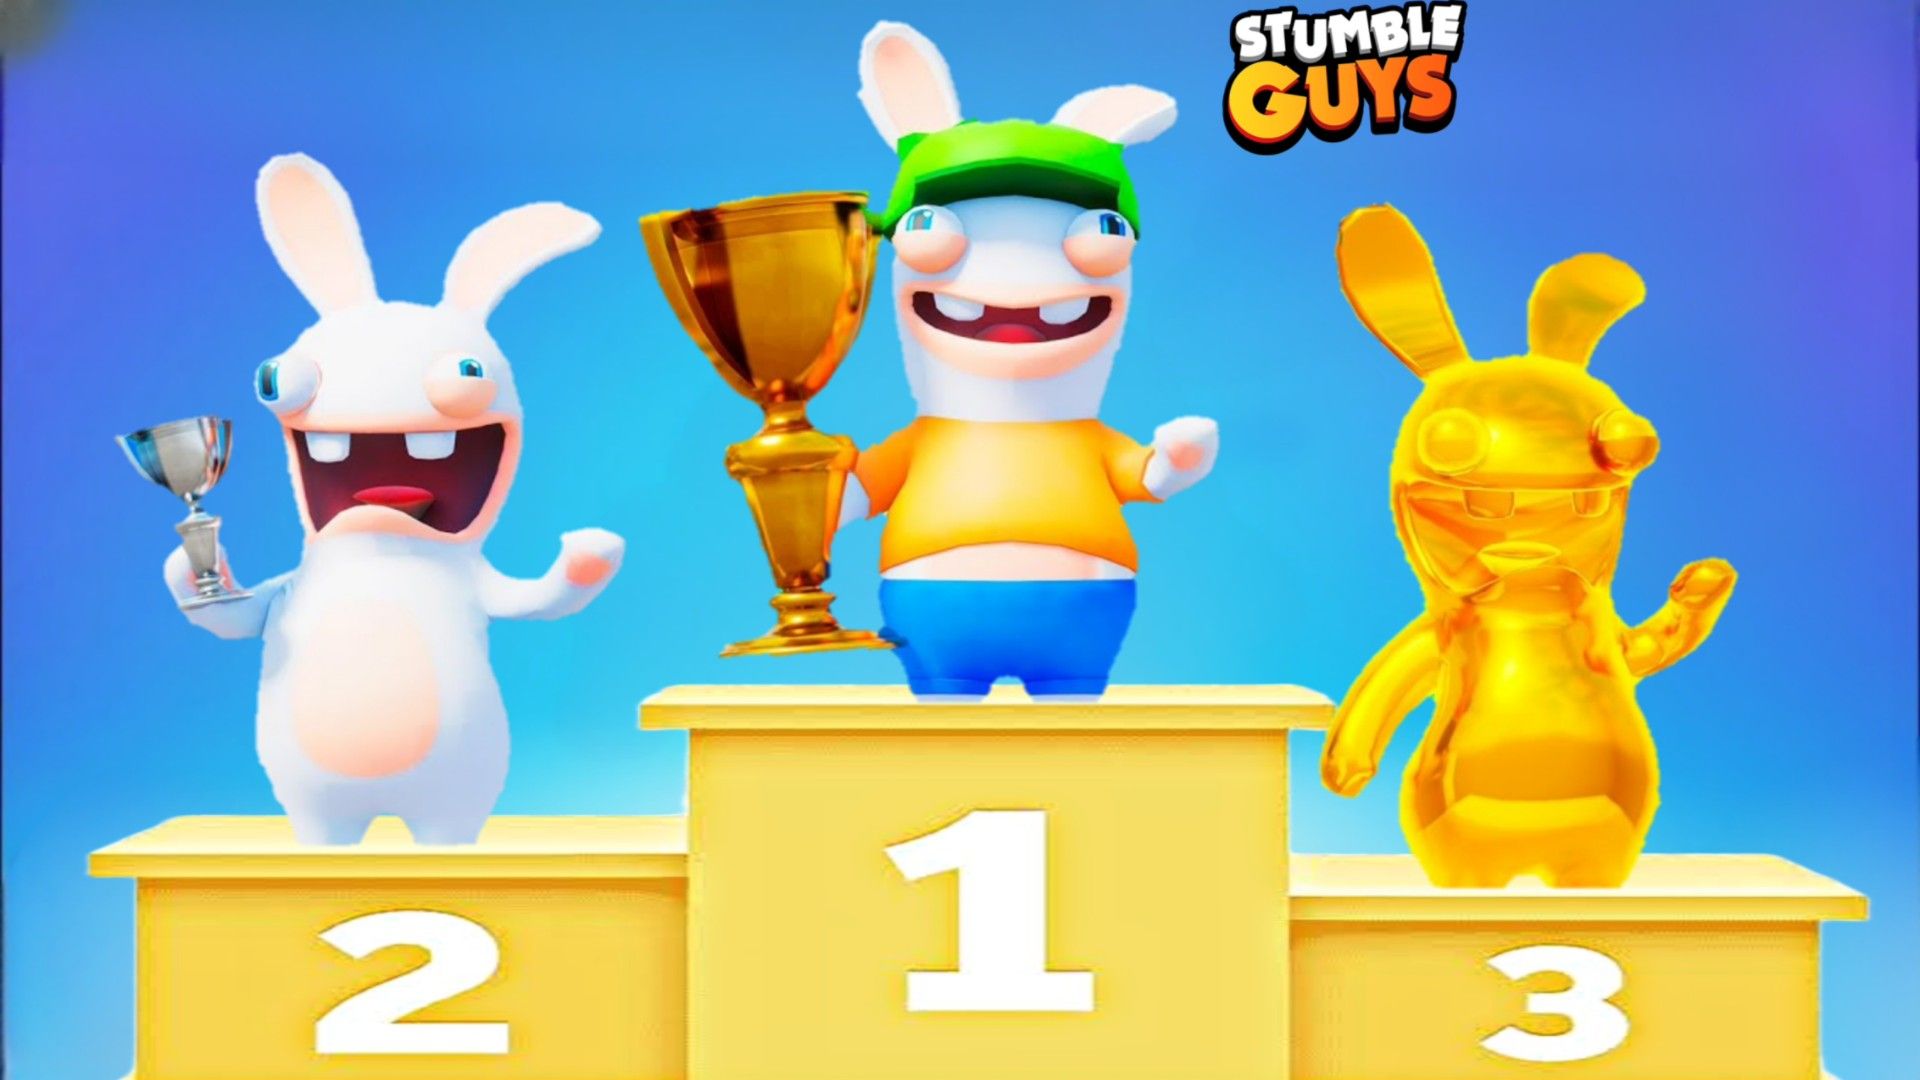 Stumble Guys” unleashes Ubisoft's Rabbids in a wild new takeover event